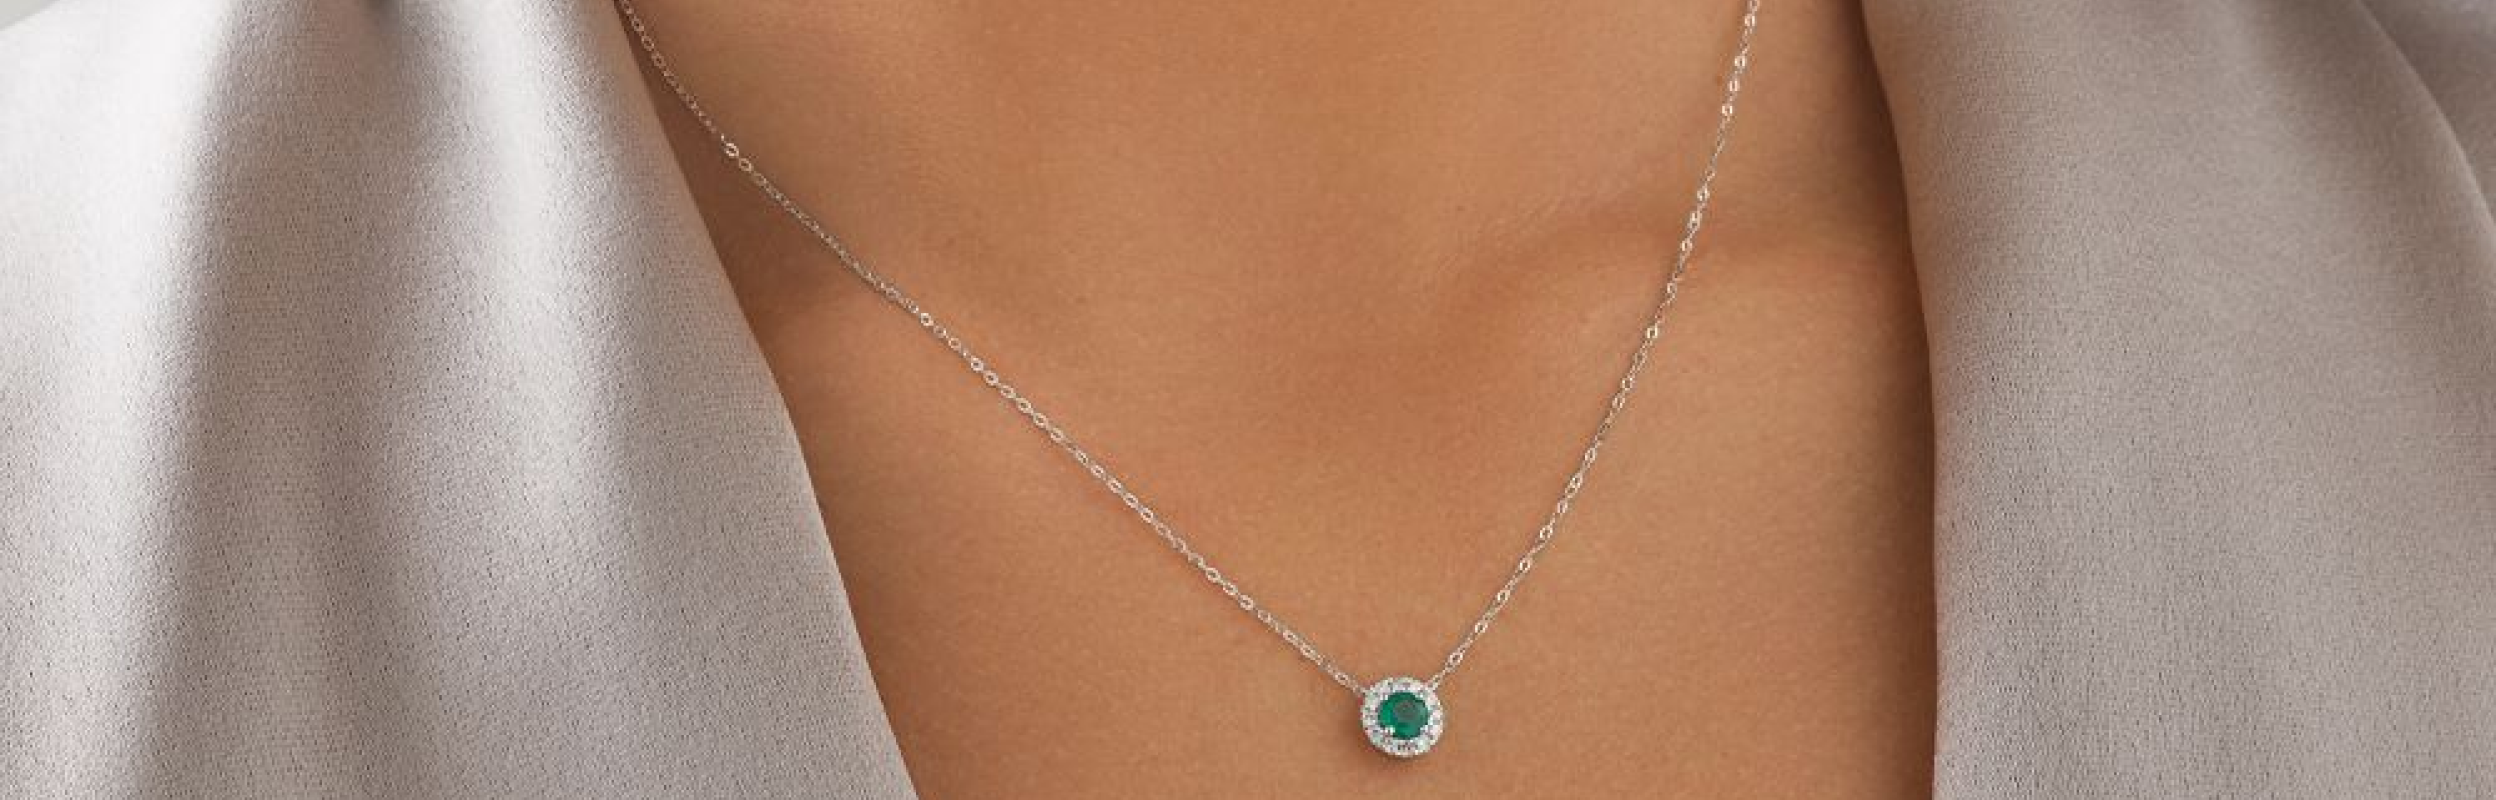 green stone pendant necklace in white gold